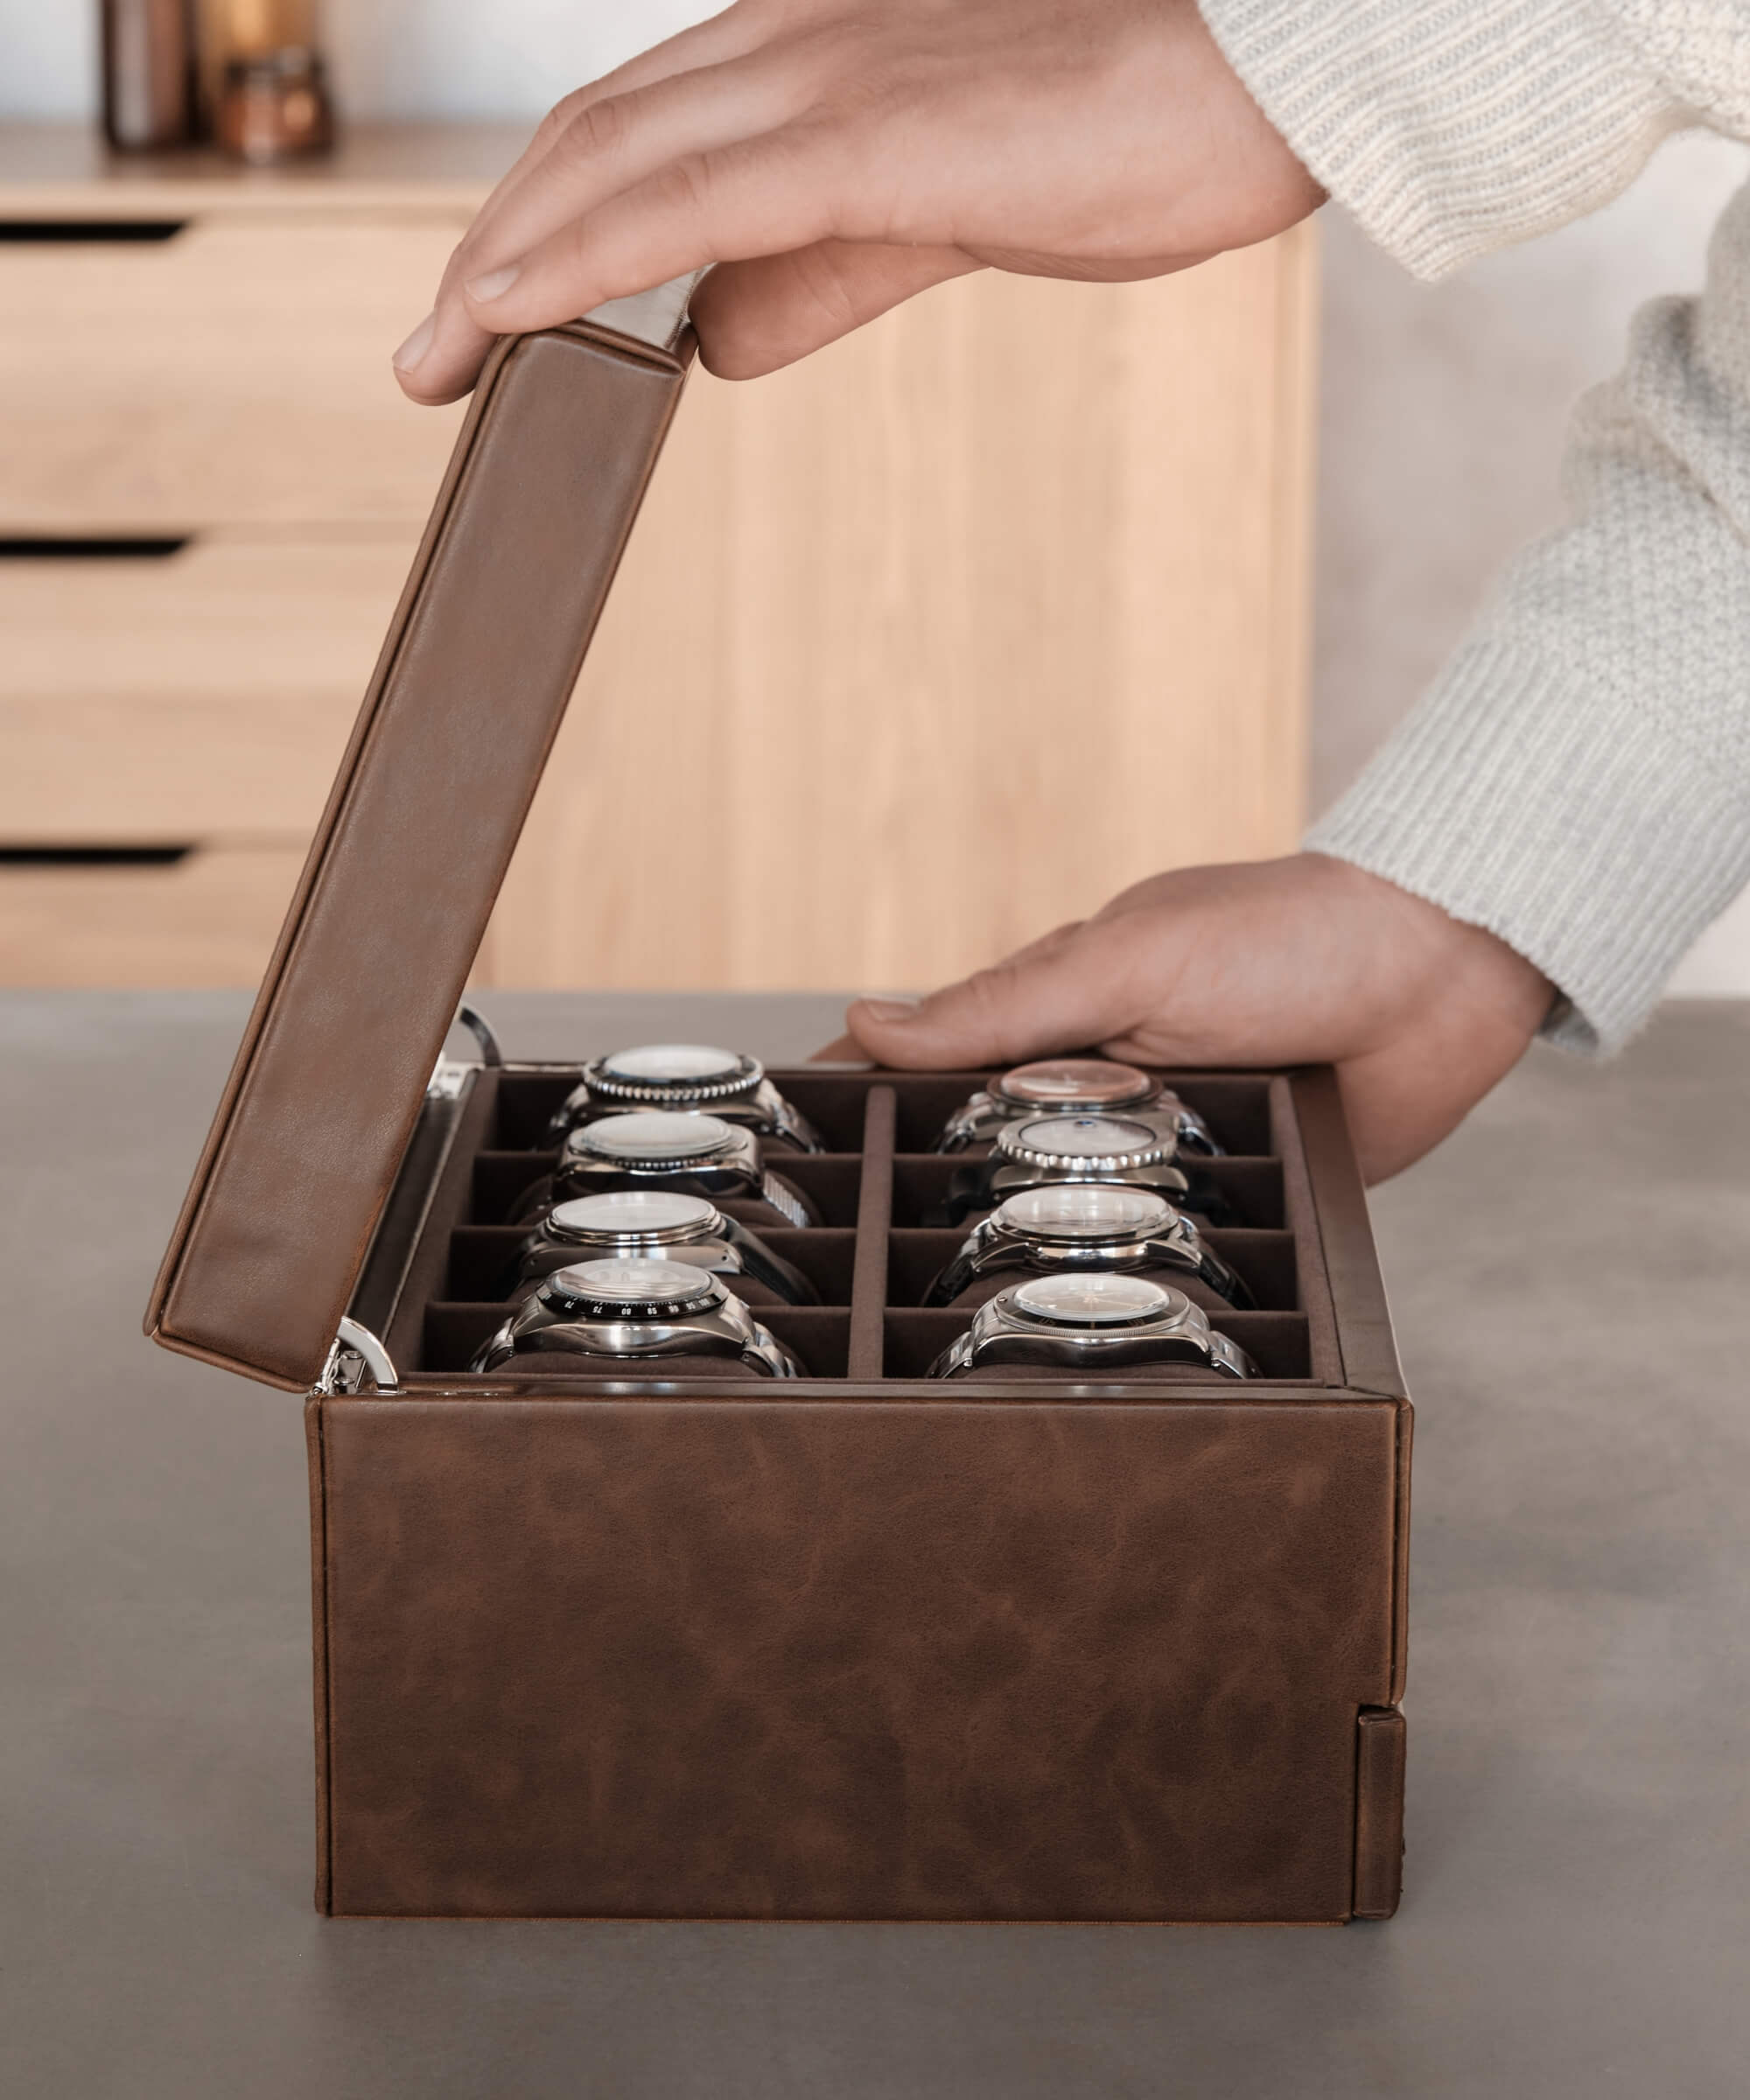 A person holding a TAWBURY Bayswater 8 Slot Watch Box with Drawer - Brown filled with wrist watches.